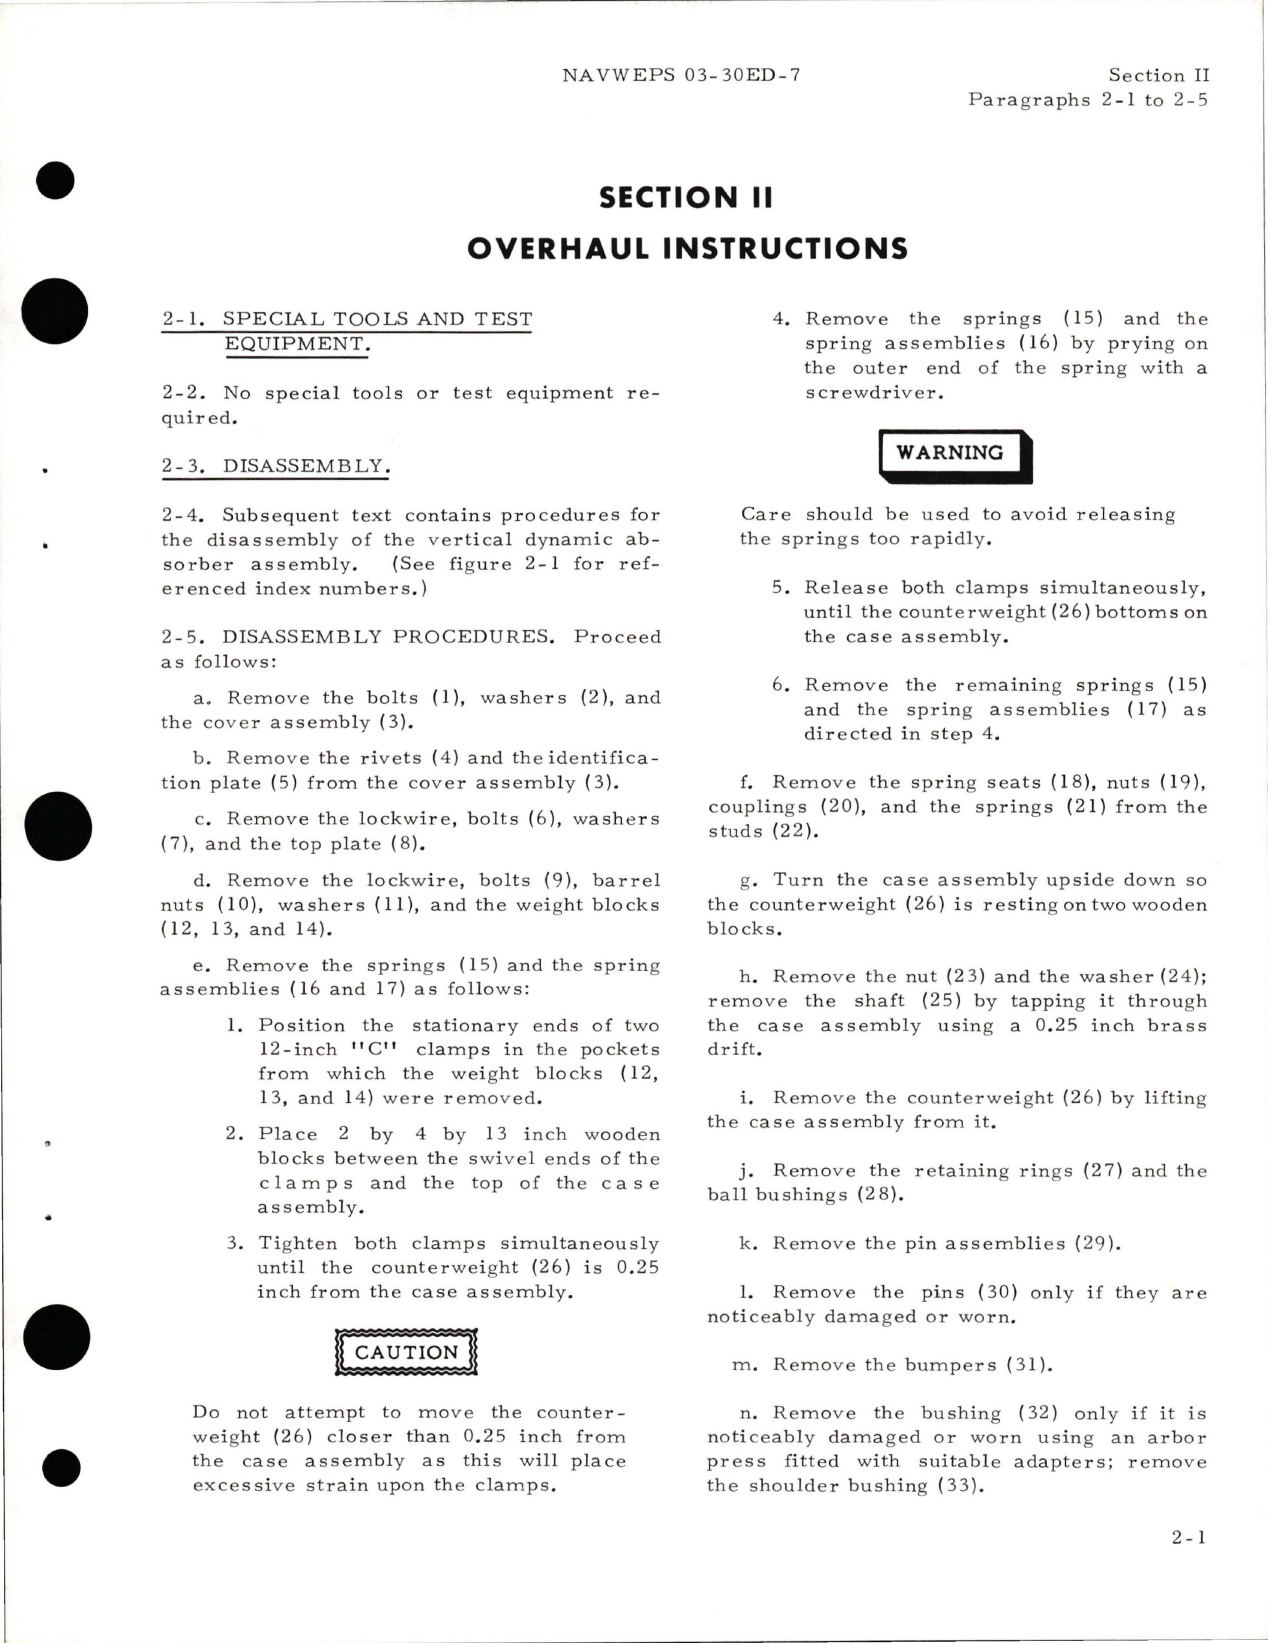 Sample page 7 from AirCorps Library document: Overhaul Instructions for Vertical Dynamic Absorber Assembly - Part A02S7124-7 and A02SA7124-9